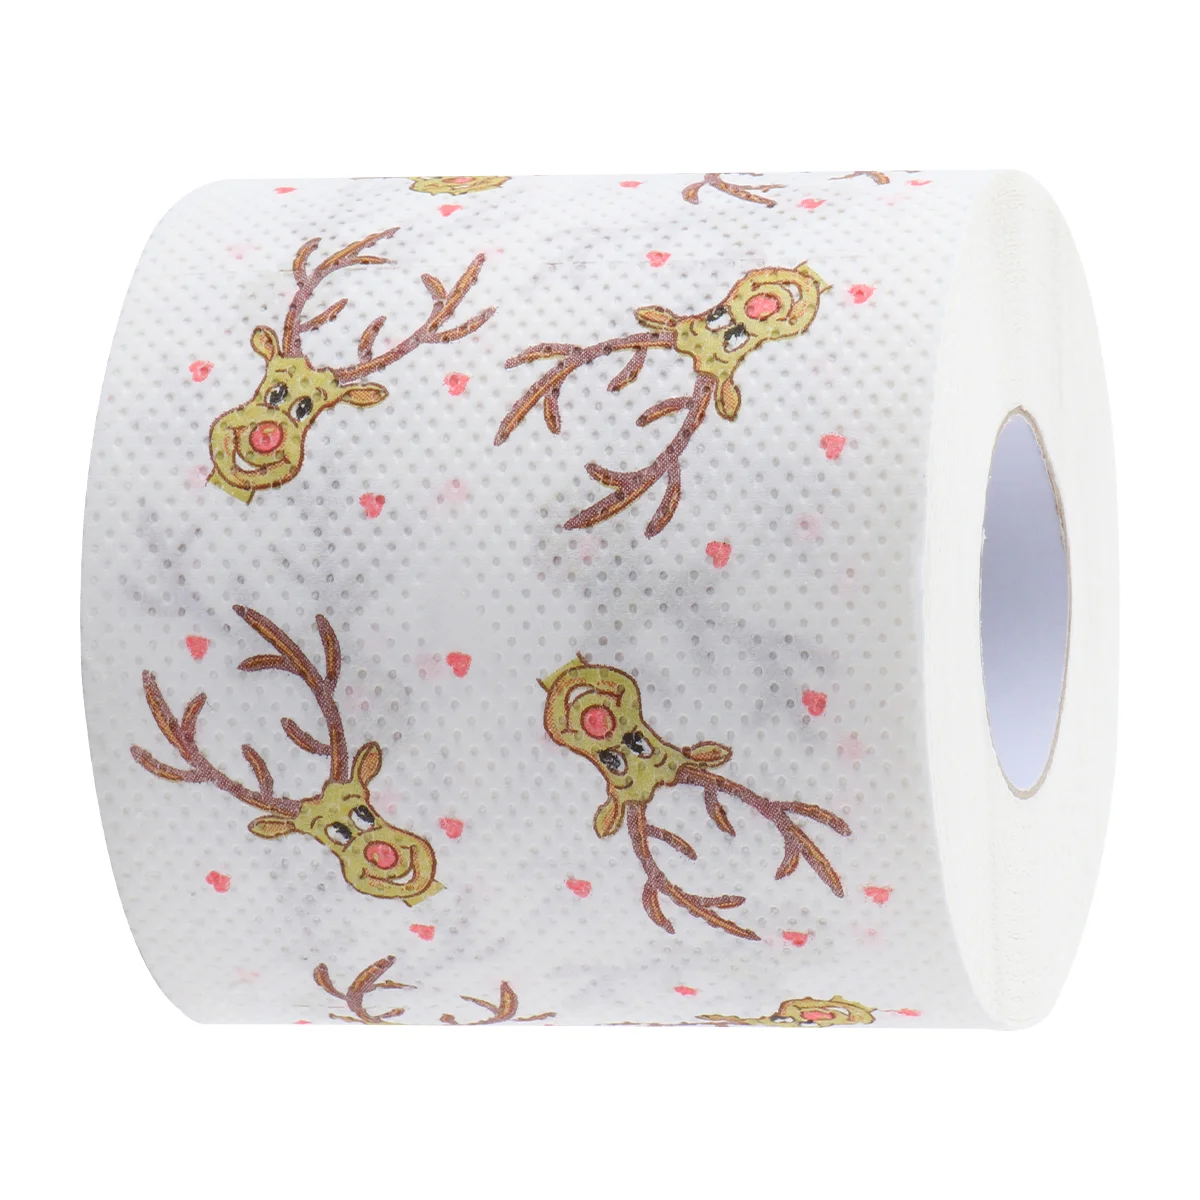 

Christmas Christmas Toliet Papers Tissue Paper Tissue Napkin with Reindeer Patern for Holiday Christmas Party Decoration